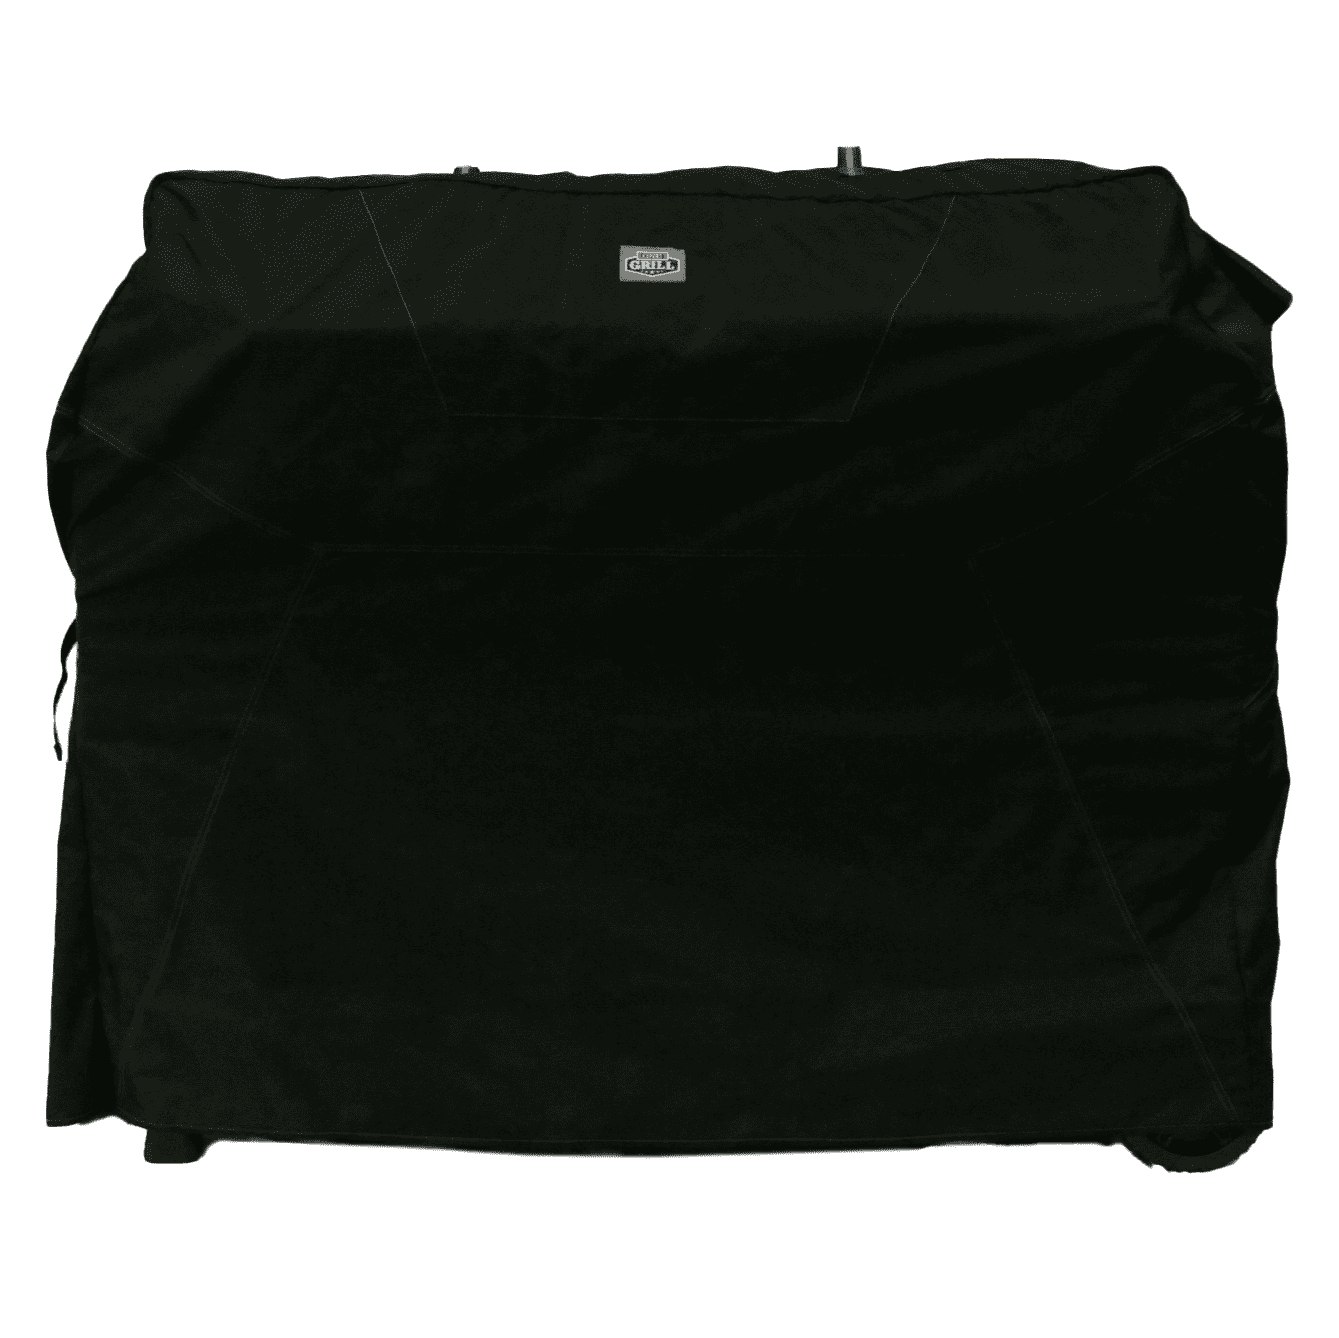 Expert Grill Gas Griddle Combo Grill Cover, Black